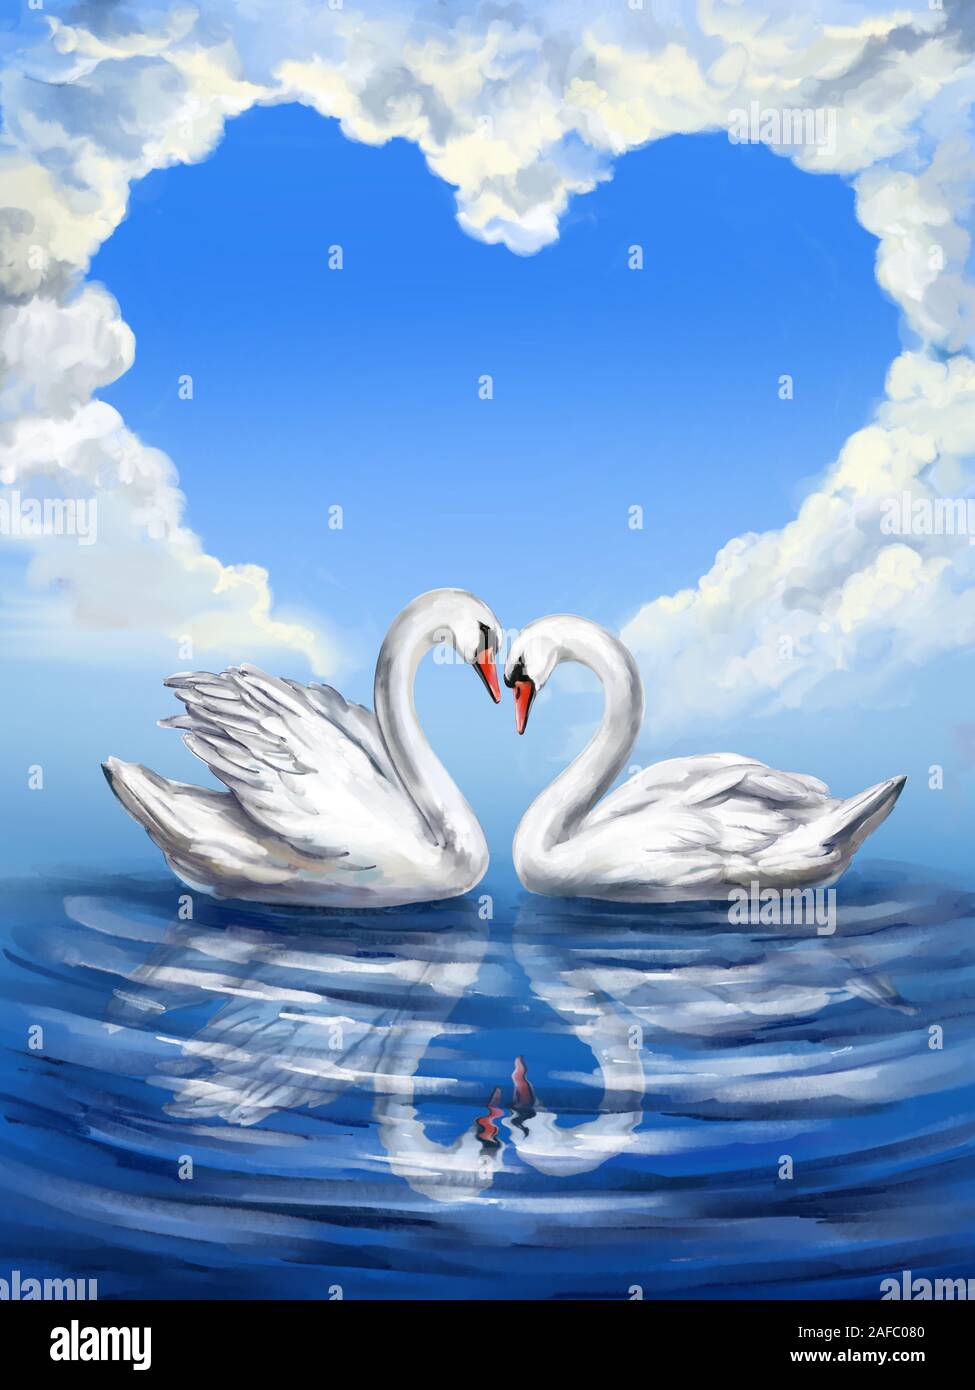 two white Swan birds on a pond together on the background of the sky with clouds in the shape of a heart, symbol of love, Valentine's day card, weddin Stock Photo